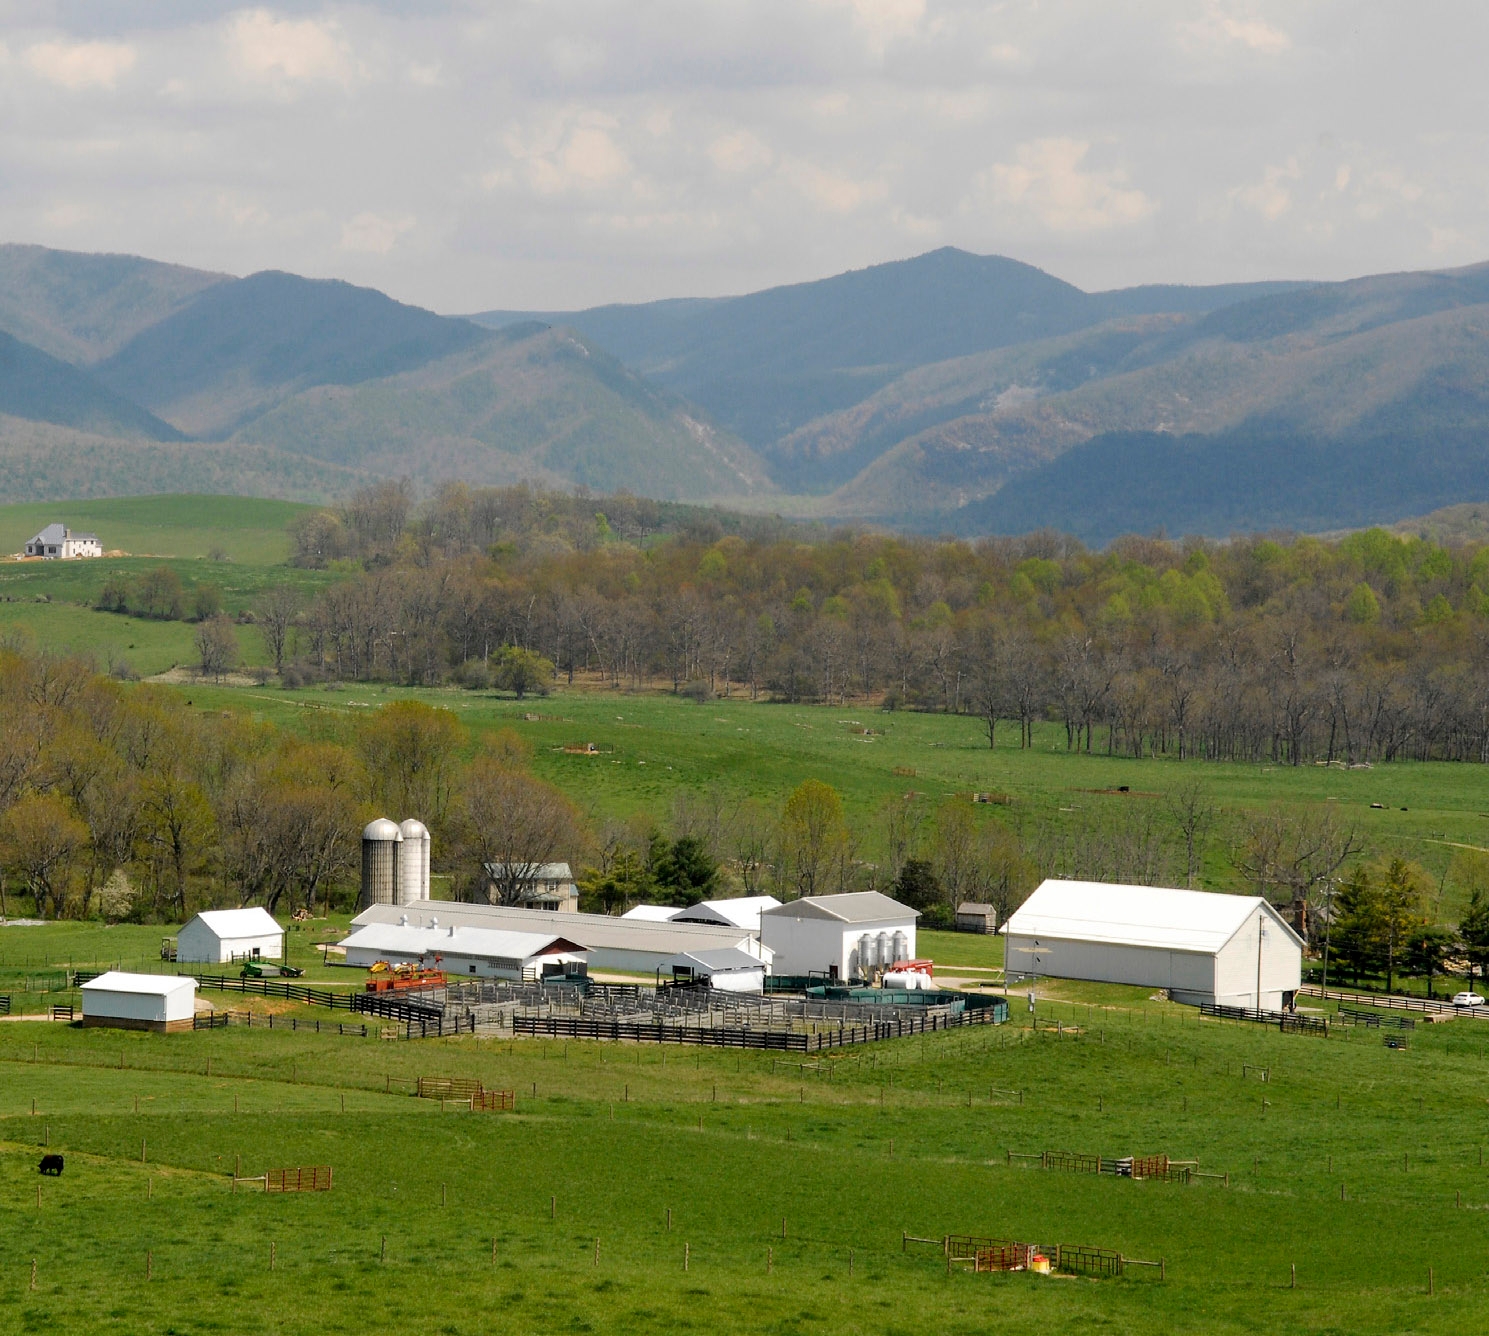 A photo of the Shenandoah Valley AREC from a distance.